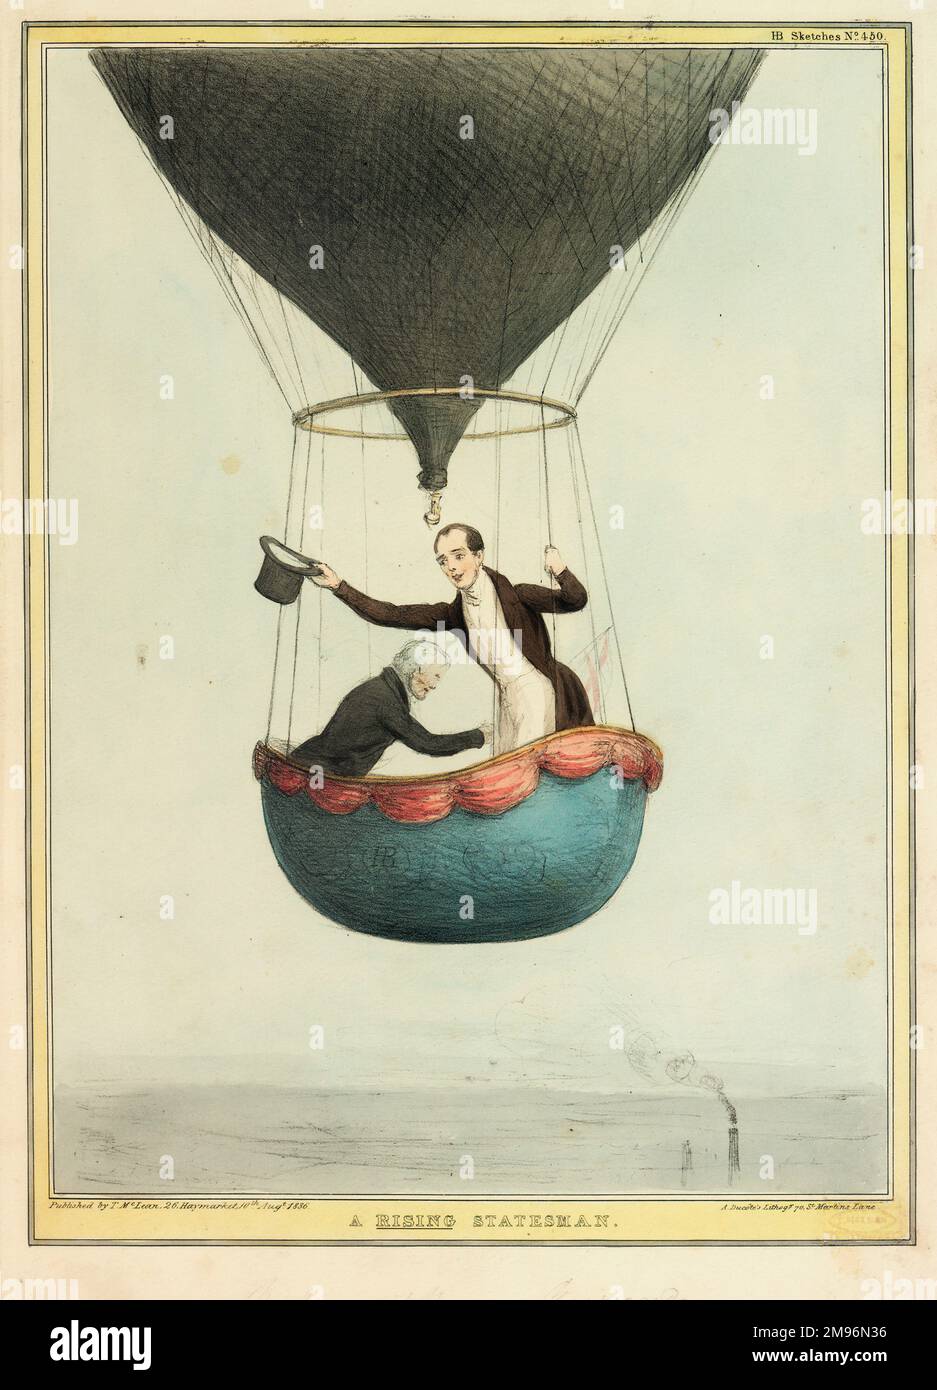 Satirical political cartoon, A Rising Statesman.  Showing a young politician with an older man in a balloon gondola, waving his hat to an imaginary crowd below.  He is Ulick John de Burgh, 1st Marquess of Clanricarde, formerly Lord Dunkellin (1802-1874), a British Whig politician and Irish Peer. Stock Photo